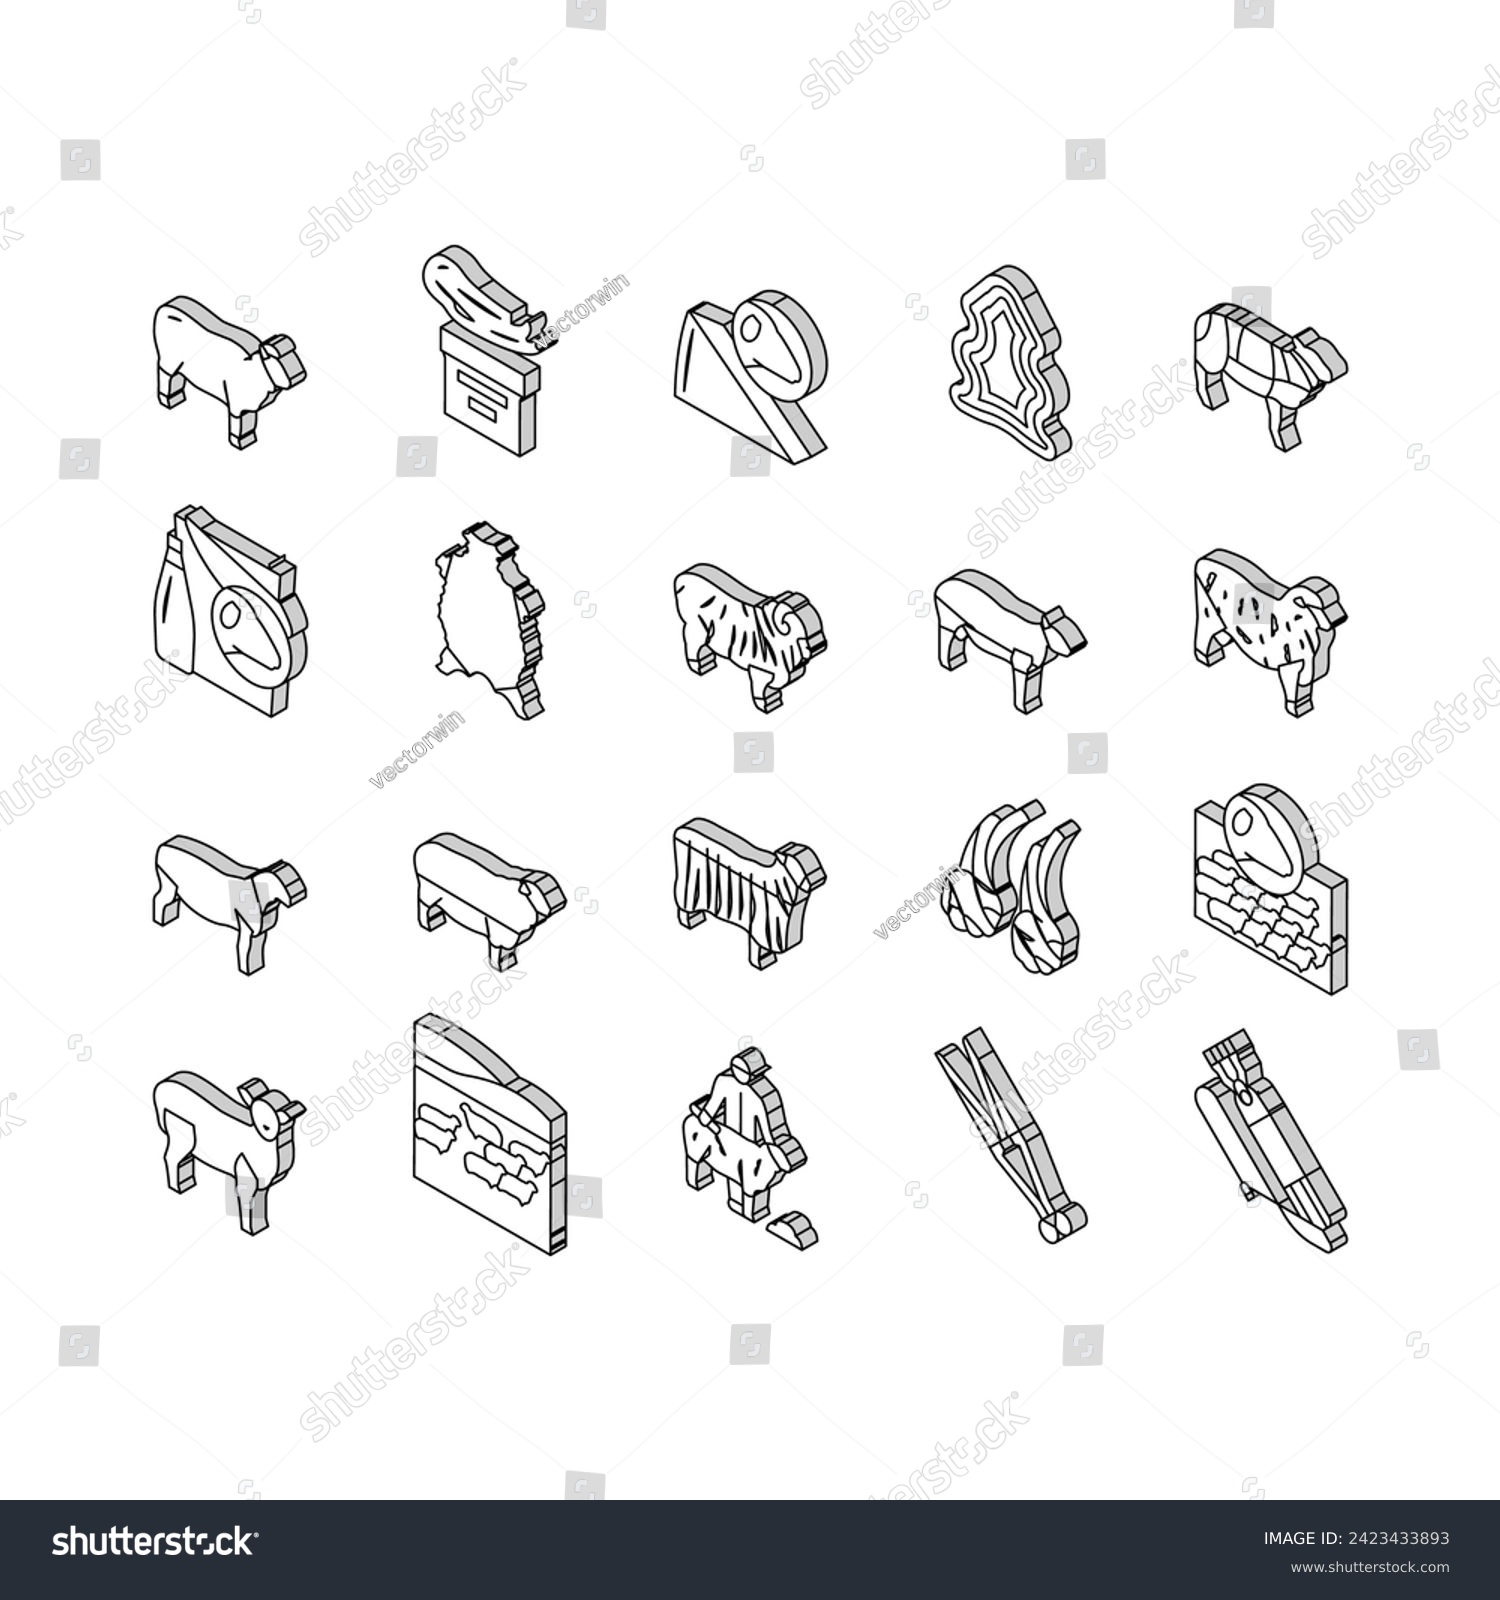 SVG of Sheep Breeding Farm Business isometric icons set. Sheep Breeding And Food Producing From Farmland Animal, Lamb Meat And Milk Line. Lanolin Wool Wax And Electric Devices Color . svg